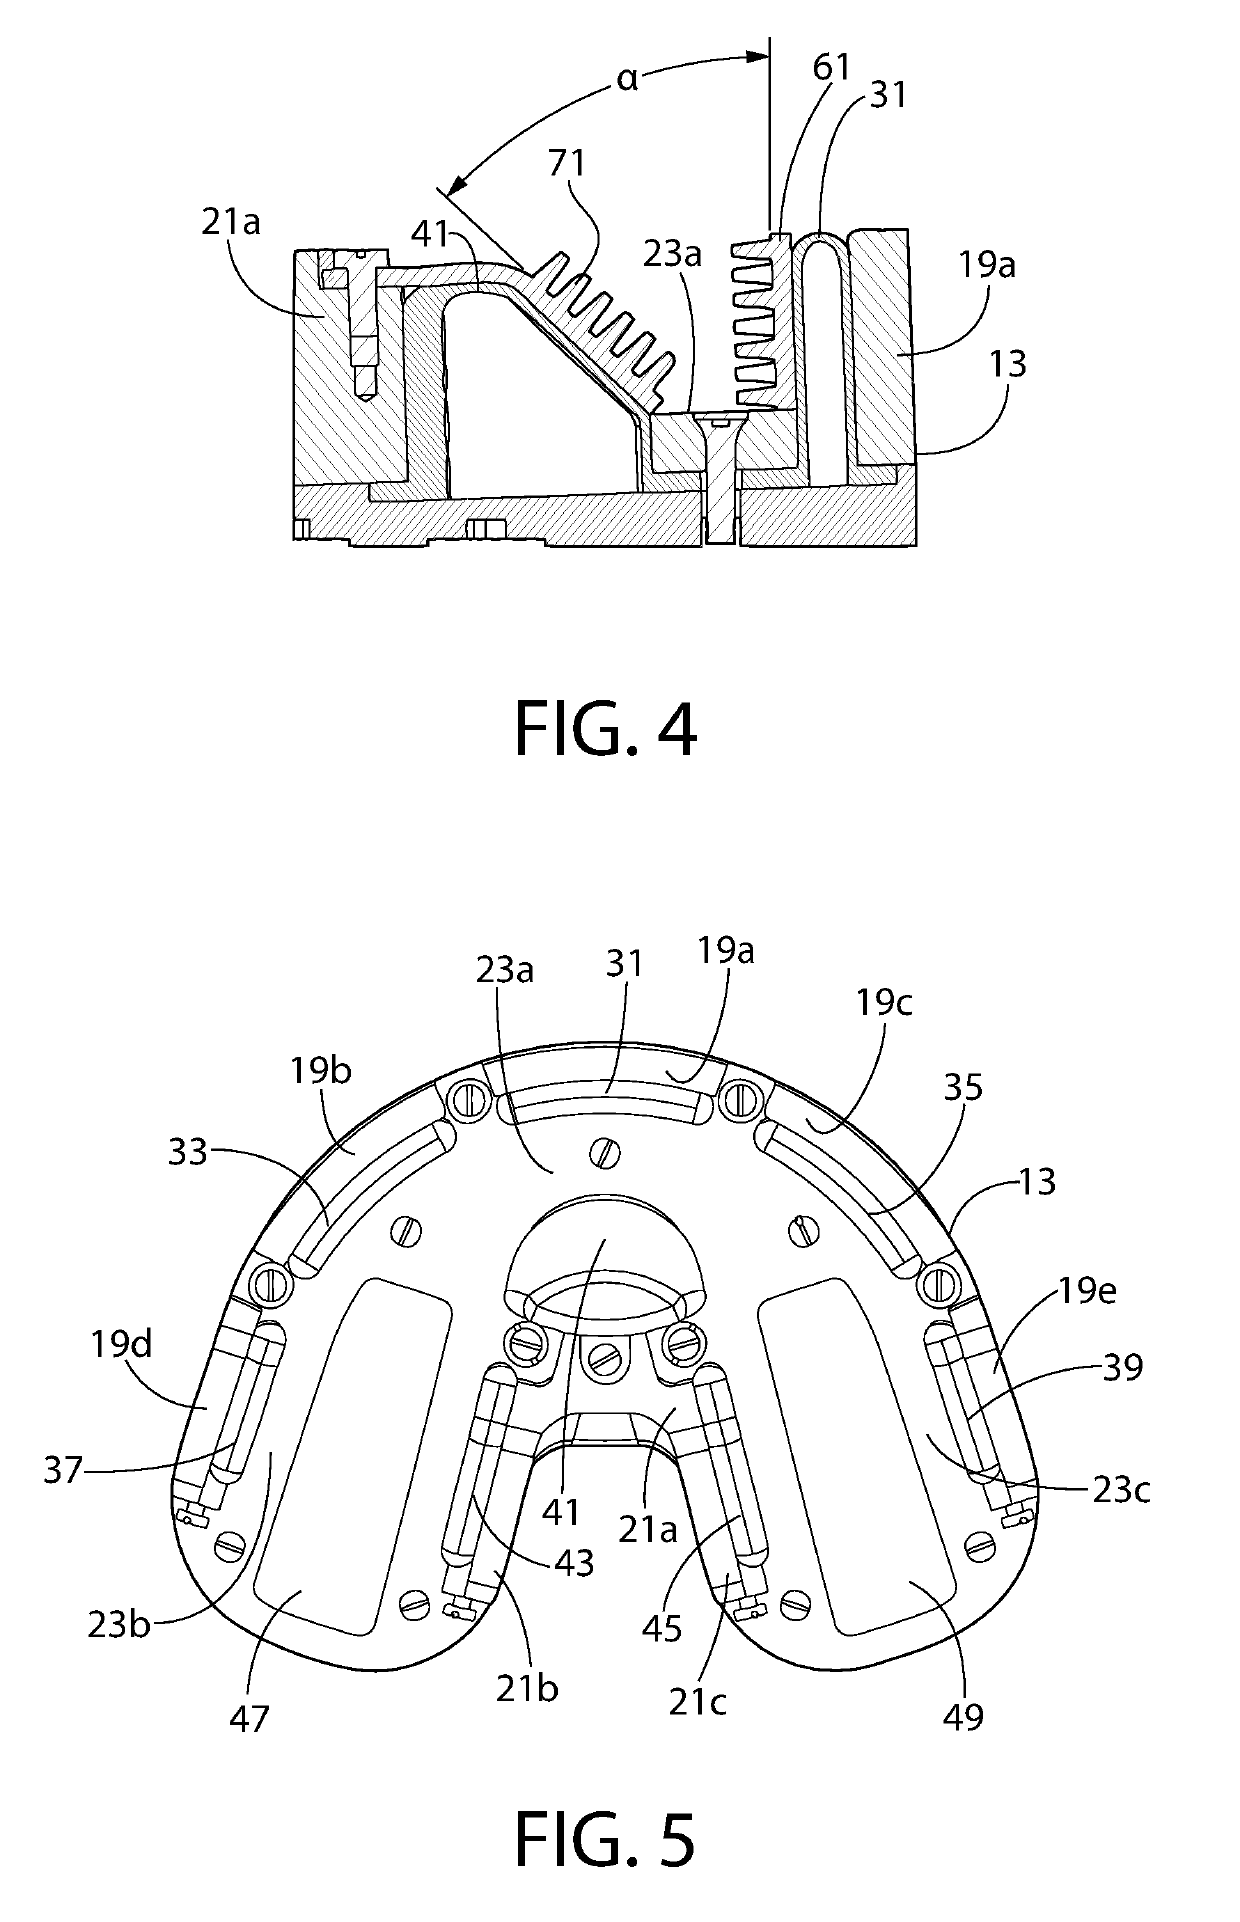 Teeth cleaning device